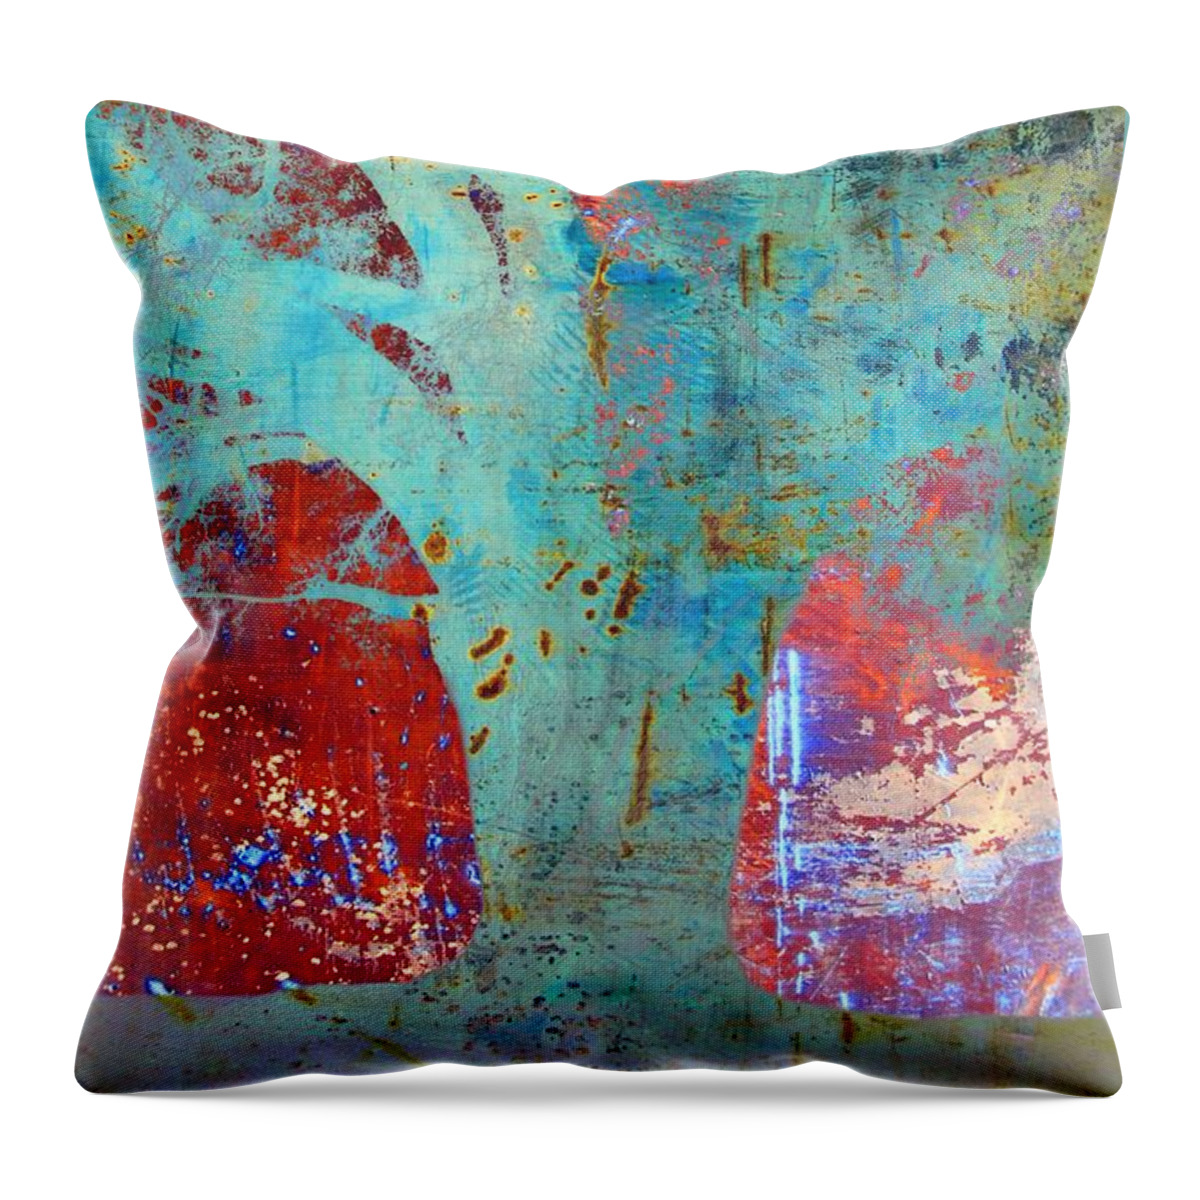 Abstracts Throw Pillow featuring the photograph Havana Oak by Jan Amiss Photography